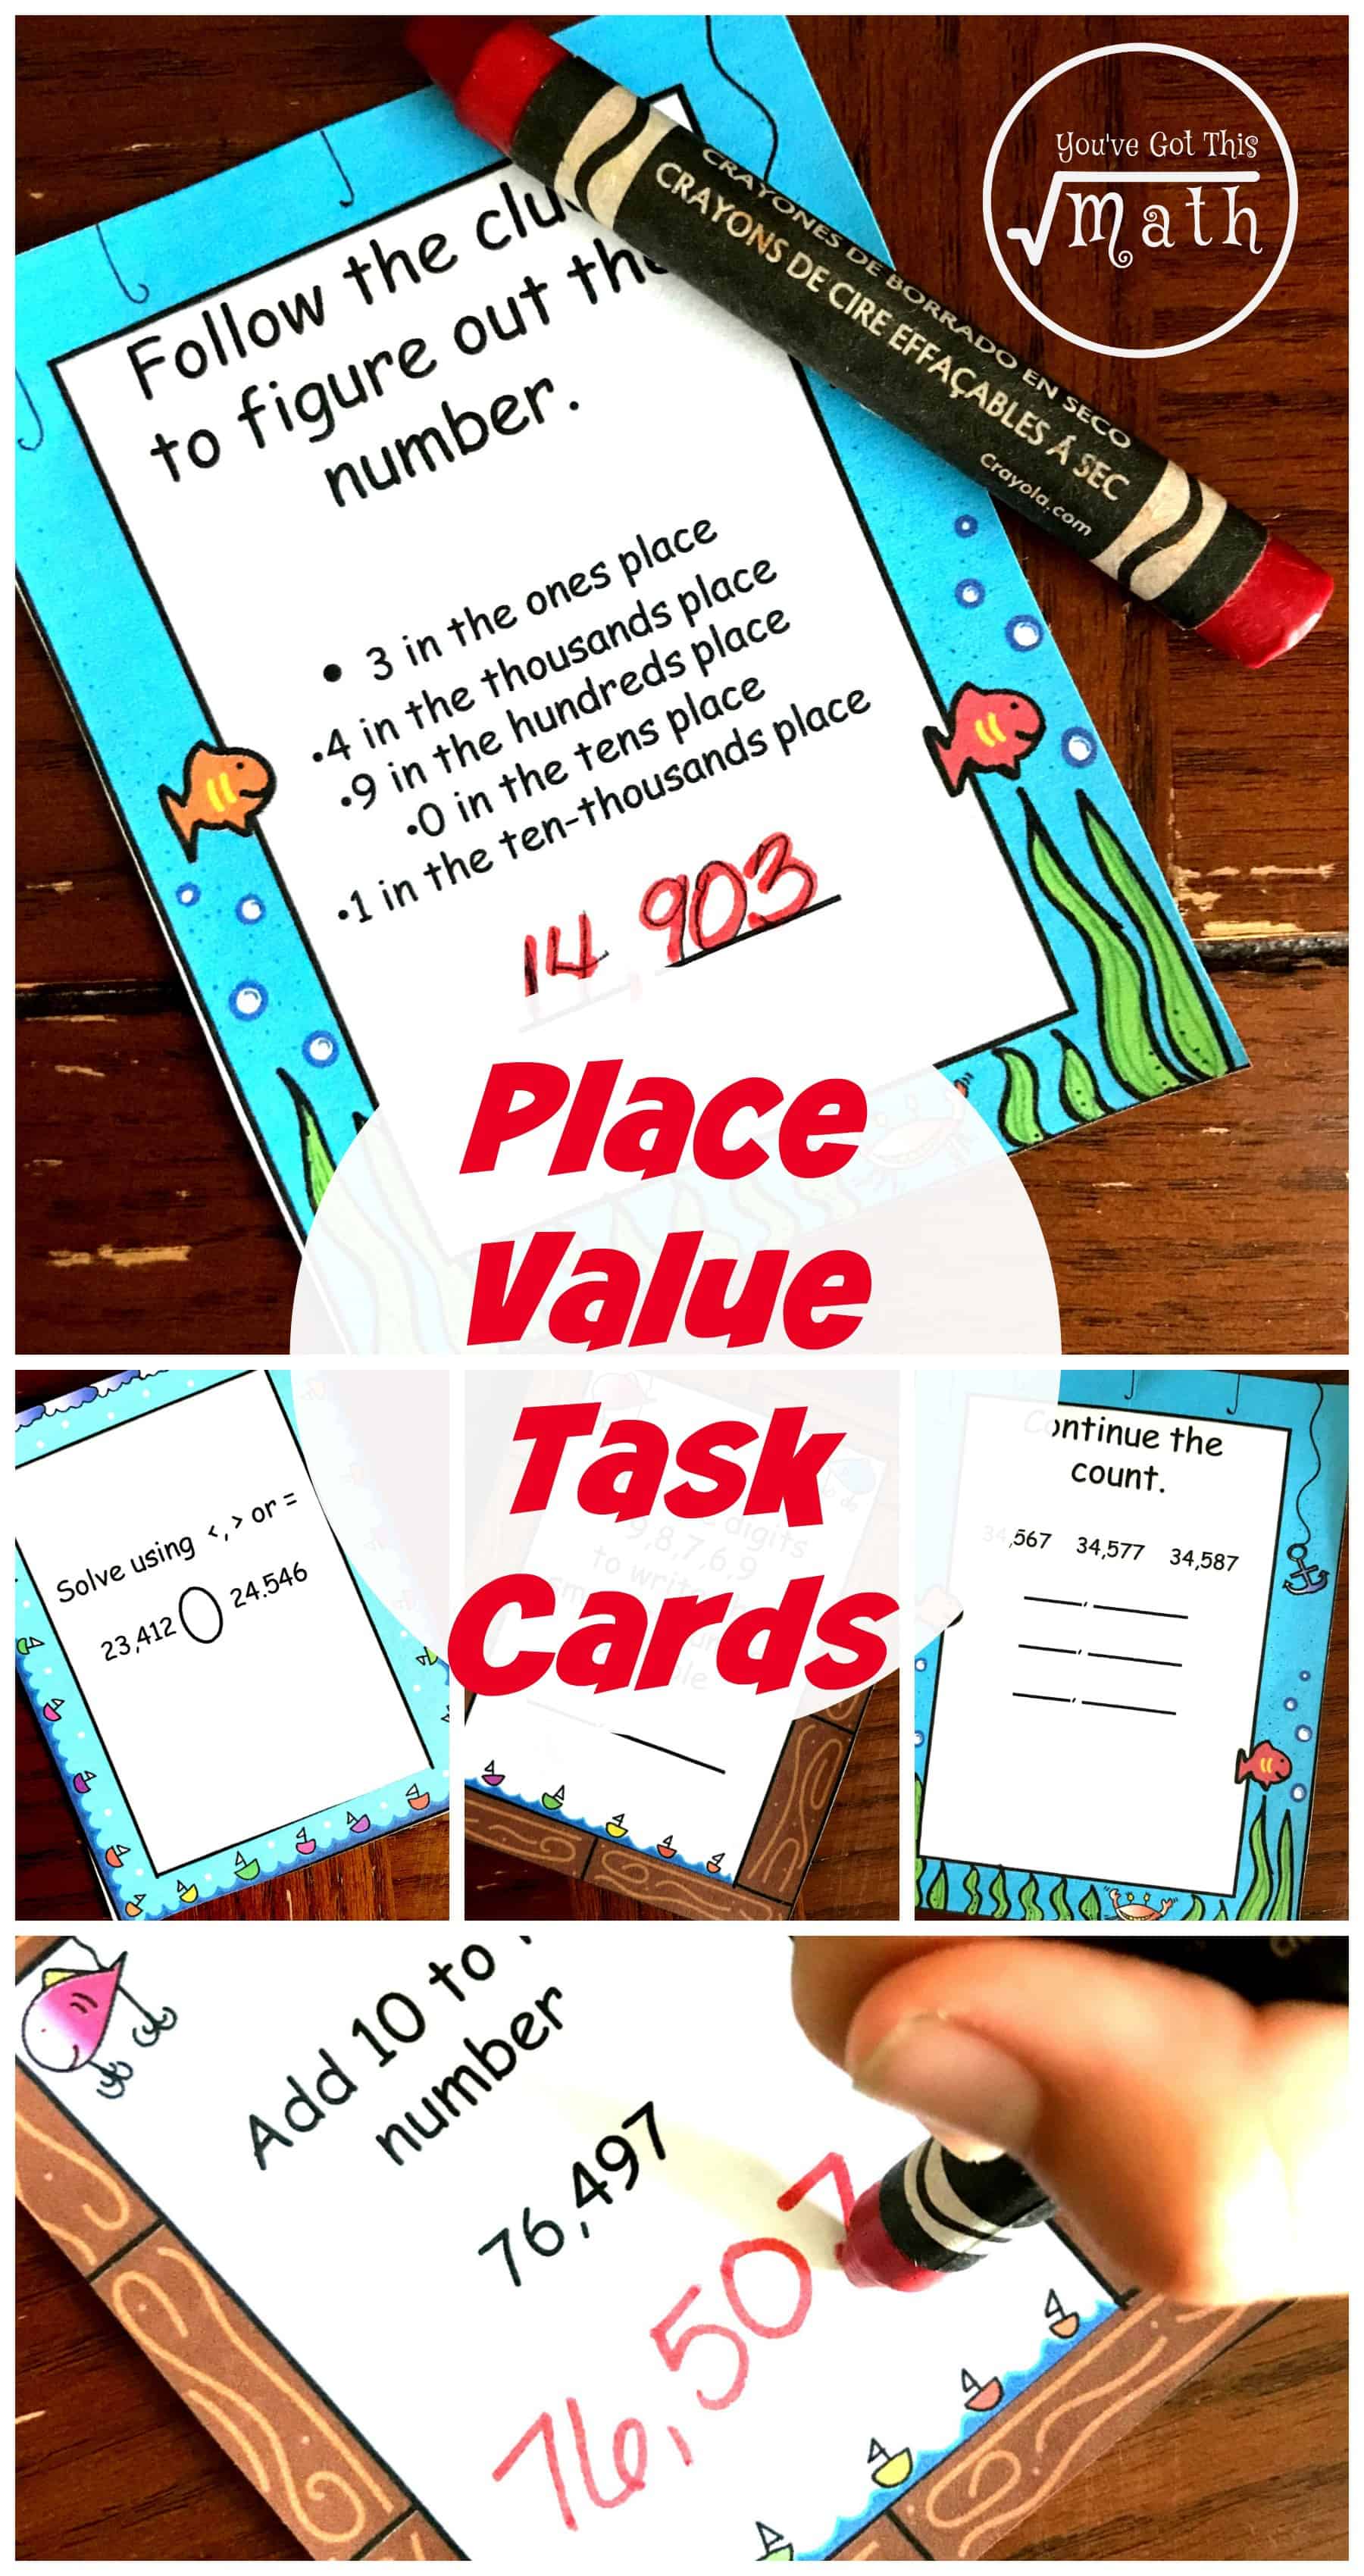 Helping children understand place value for large numbers is important. These task cards help children learn the value of digits, comparing and ordering numbers, and practice counting.